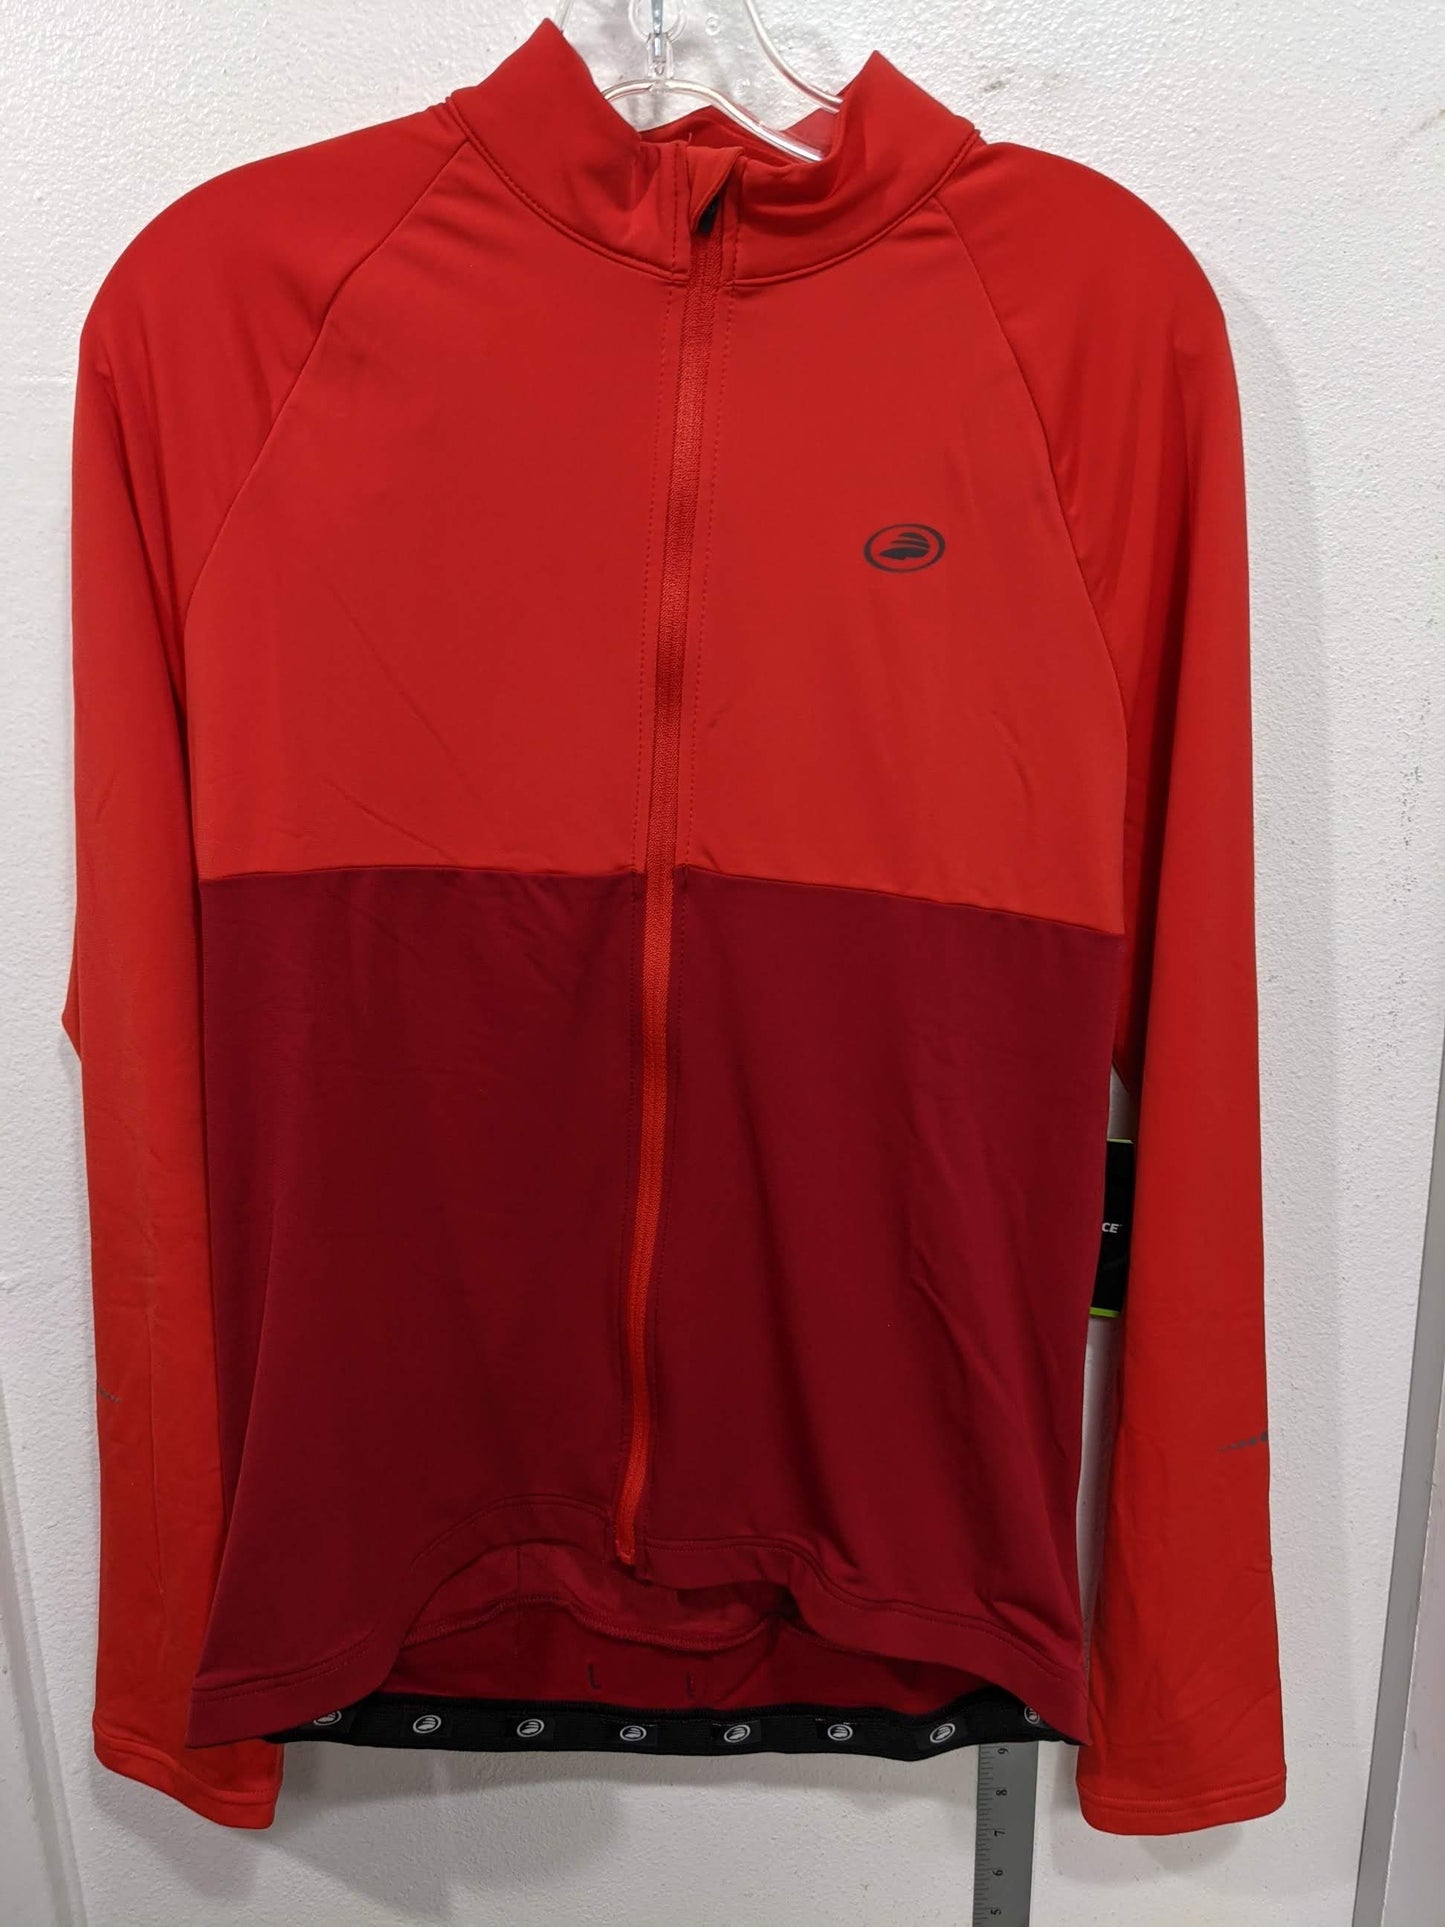 Performance Bicycle Jacket Elite Krio Red New Clearance